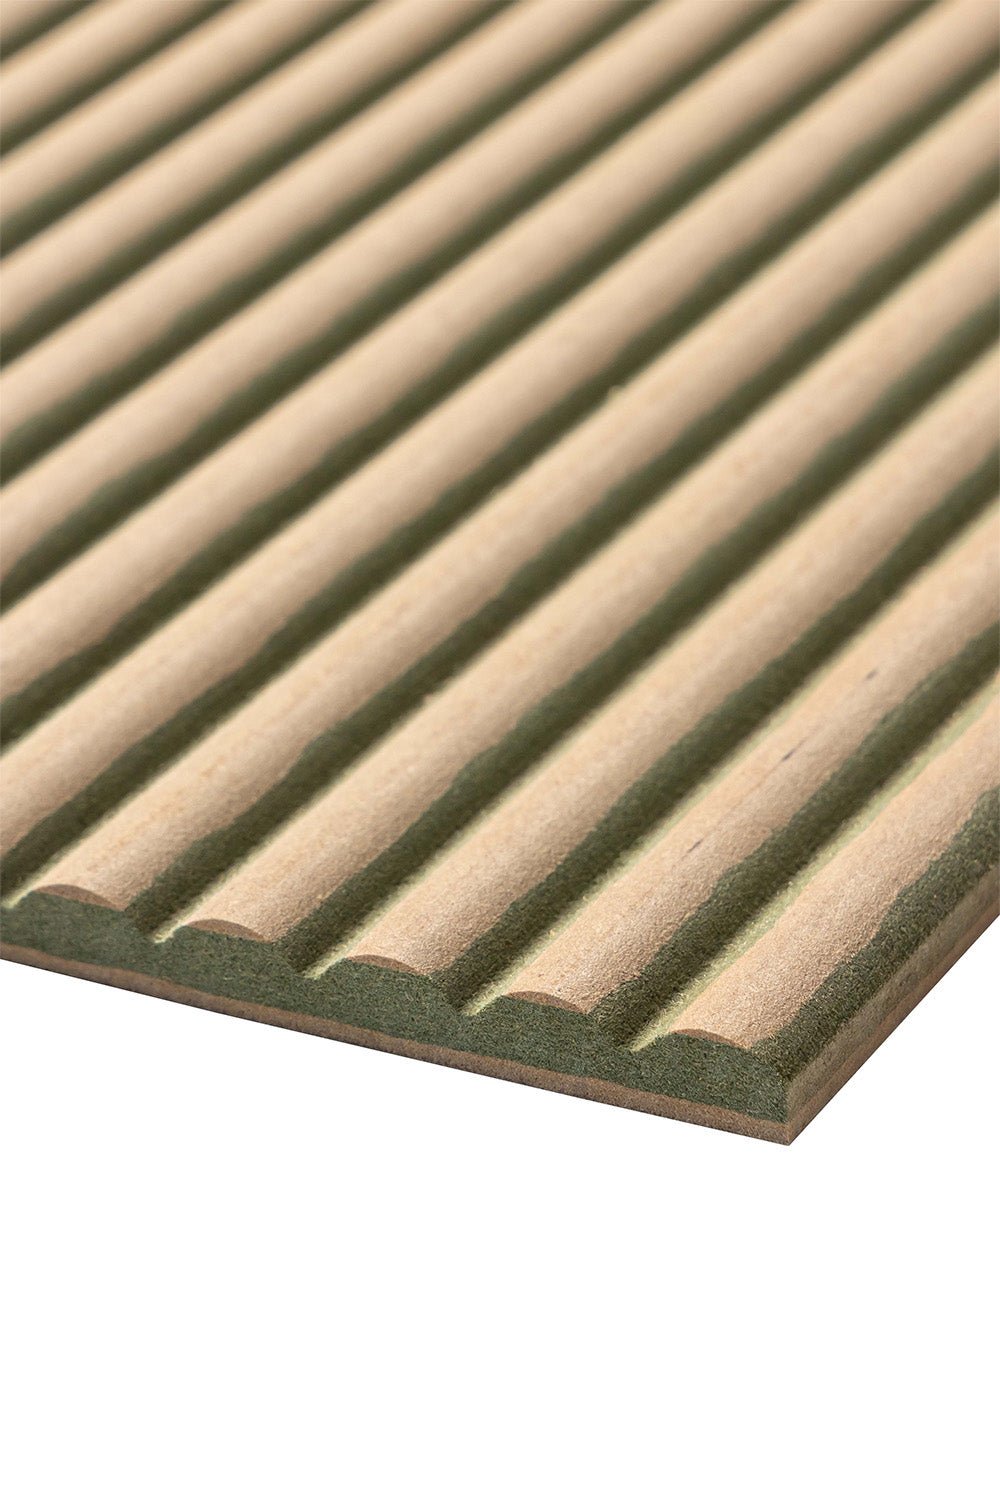 Reeded MDF Panel

